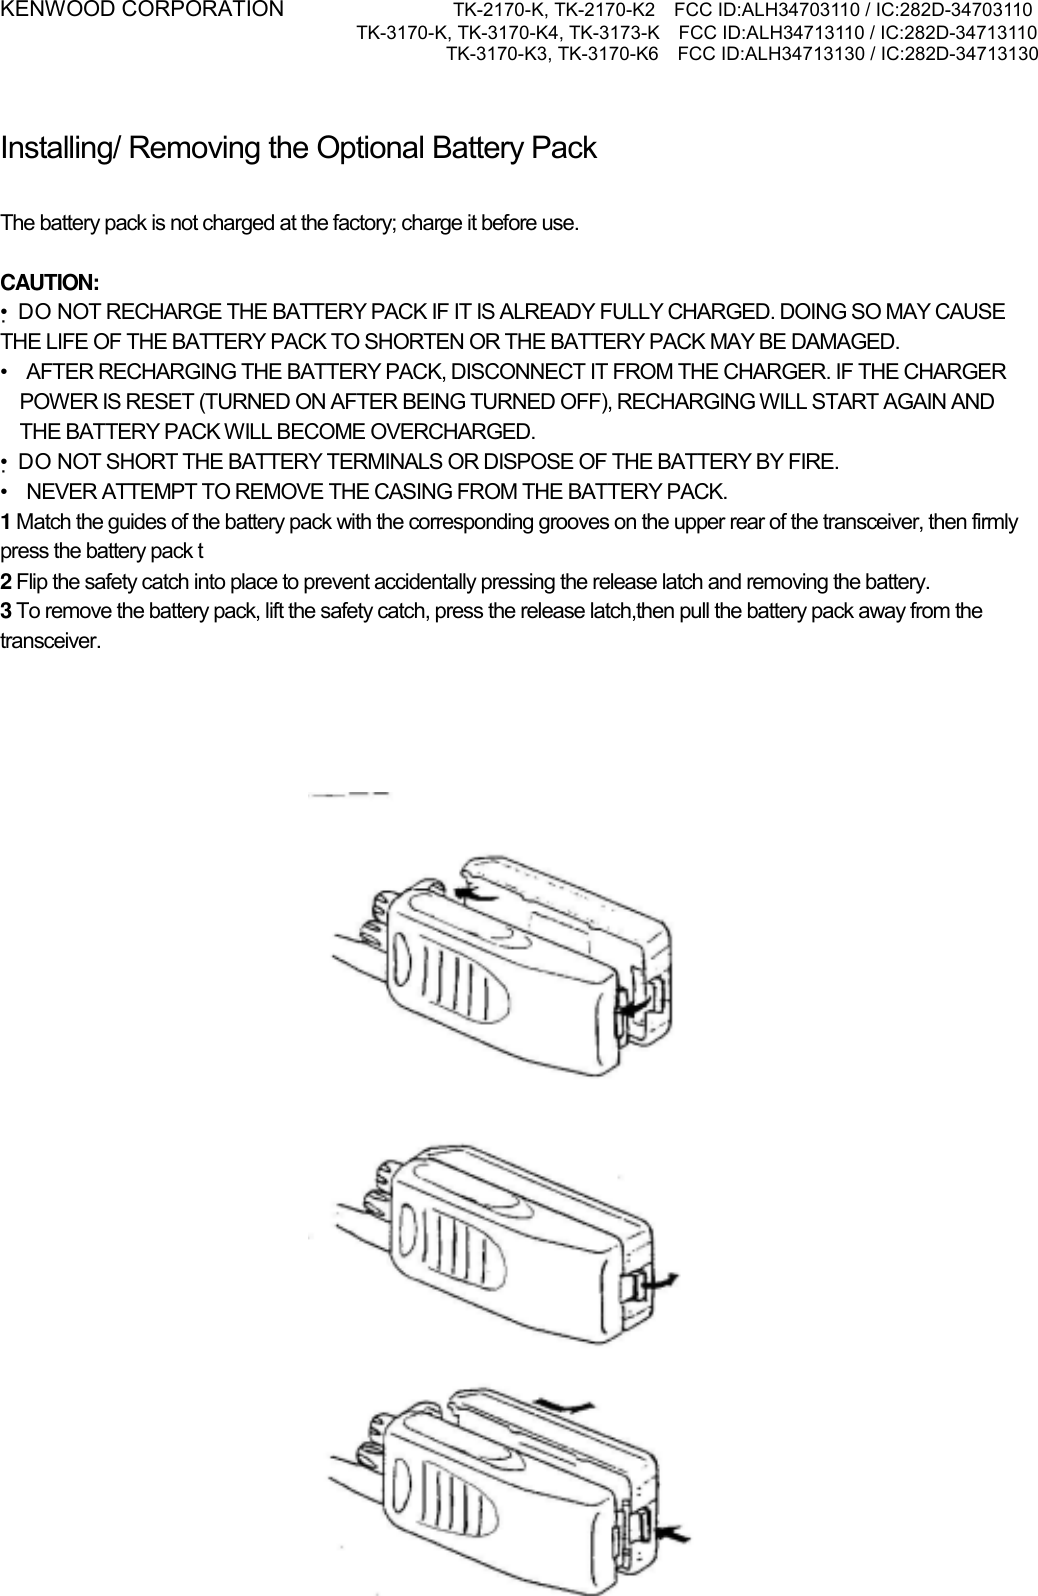 KENWOOD CORPORATION           TK-2170-K, TK-2170-K2    FCC ID:ALH34703110 / IC:282D-34703110 TK-3170-K, TK-3170-K4, TK-3173-K    FCC ID:ALH34713110 / IC:282D-34713110 TK-3170-K3, TK-3170-K6    FCC ID:ALH34713130 / IC:282D-34713130    Installing/ Removing the Optional Battery Pack PREPARATION  The battery pack is not charged at the factory; charge it before use.  CAUTION: •DO NOT RECHARGE THE BATTERY PACK IF IT IS ALREADY FULLY CHARGED. DOING SO MAY CAUSE THE LIFE OF THE BATTERY PACK TO SHORTEN OR THE BATTERY PACK MAY BE DAMAGED. •    AFTER RECHARGING THE BATTERY PACK, DISCONNECT IT FROM THE CHARGER. IF THE CHARGER POWER IS RESET (TURNED ON AFTER BEING TURNED OFF), RECHARGING WILL START AGAIN AND THE BATTERY PACK WILL BECOME OVERCHARGED. •DO NOT SHORT THE BATTERY TERMINALS OR DISPOSE OF THE BATTERY BY FIRE. •    NEVER ATTEMPT TO REMOVE THE CASING FROM THE BATTERY PACK. 1 Match the guides of the battery pack with the corresponding grooves on the upper rear of the transceiver, then firmly press the battery pack t 2 Flip the safety catch into place to prevent accidentally pressing the release latch and removing the battery. 3 To remove the battery pack, lift the safety catch, press the release latch,then pull the battery pack away from the transceiver.   